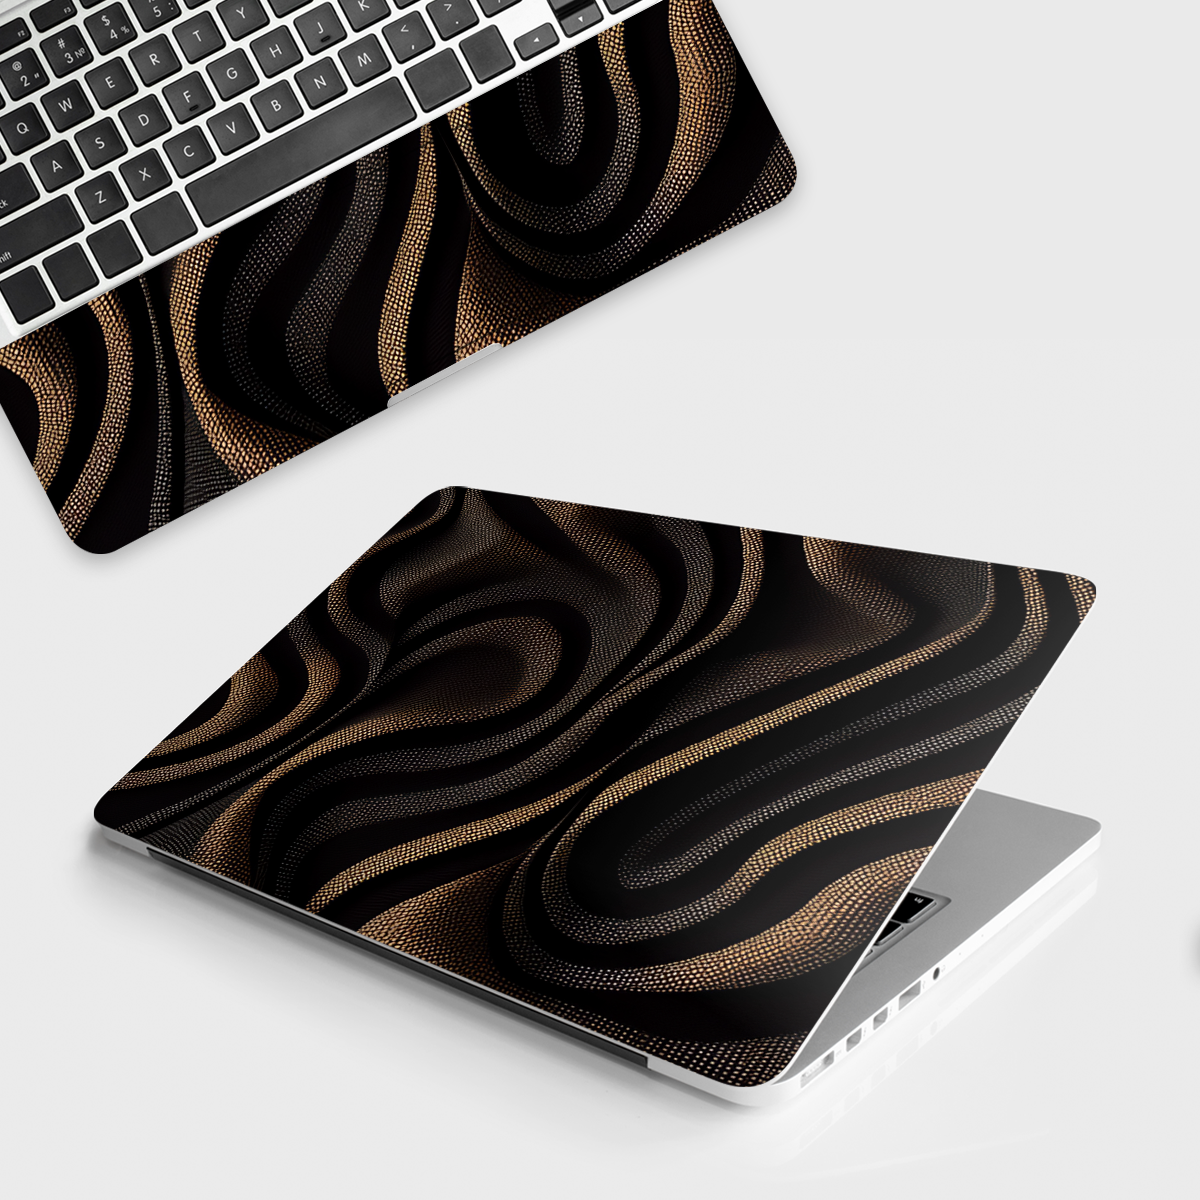 Fomo Store Laptop Skins Abstract Wave Pattern